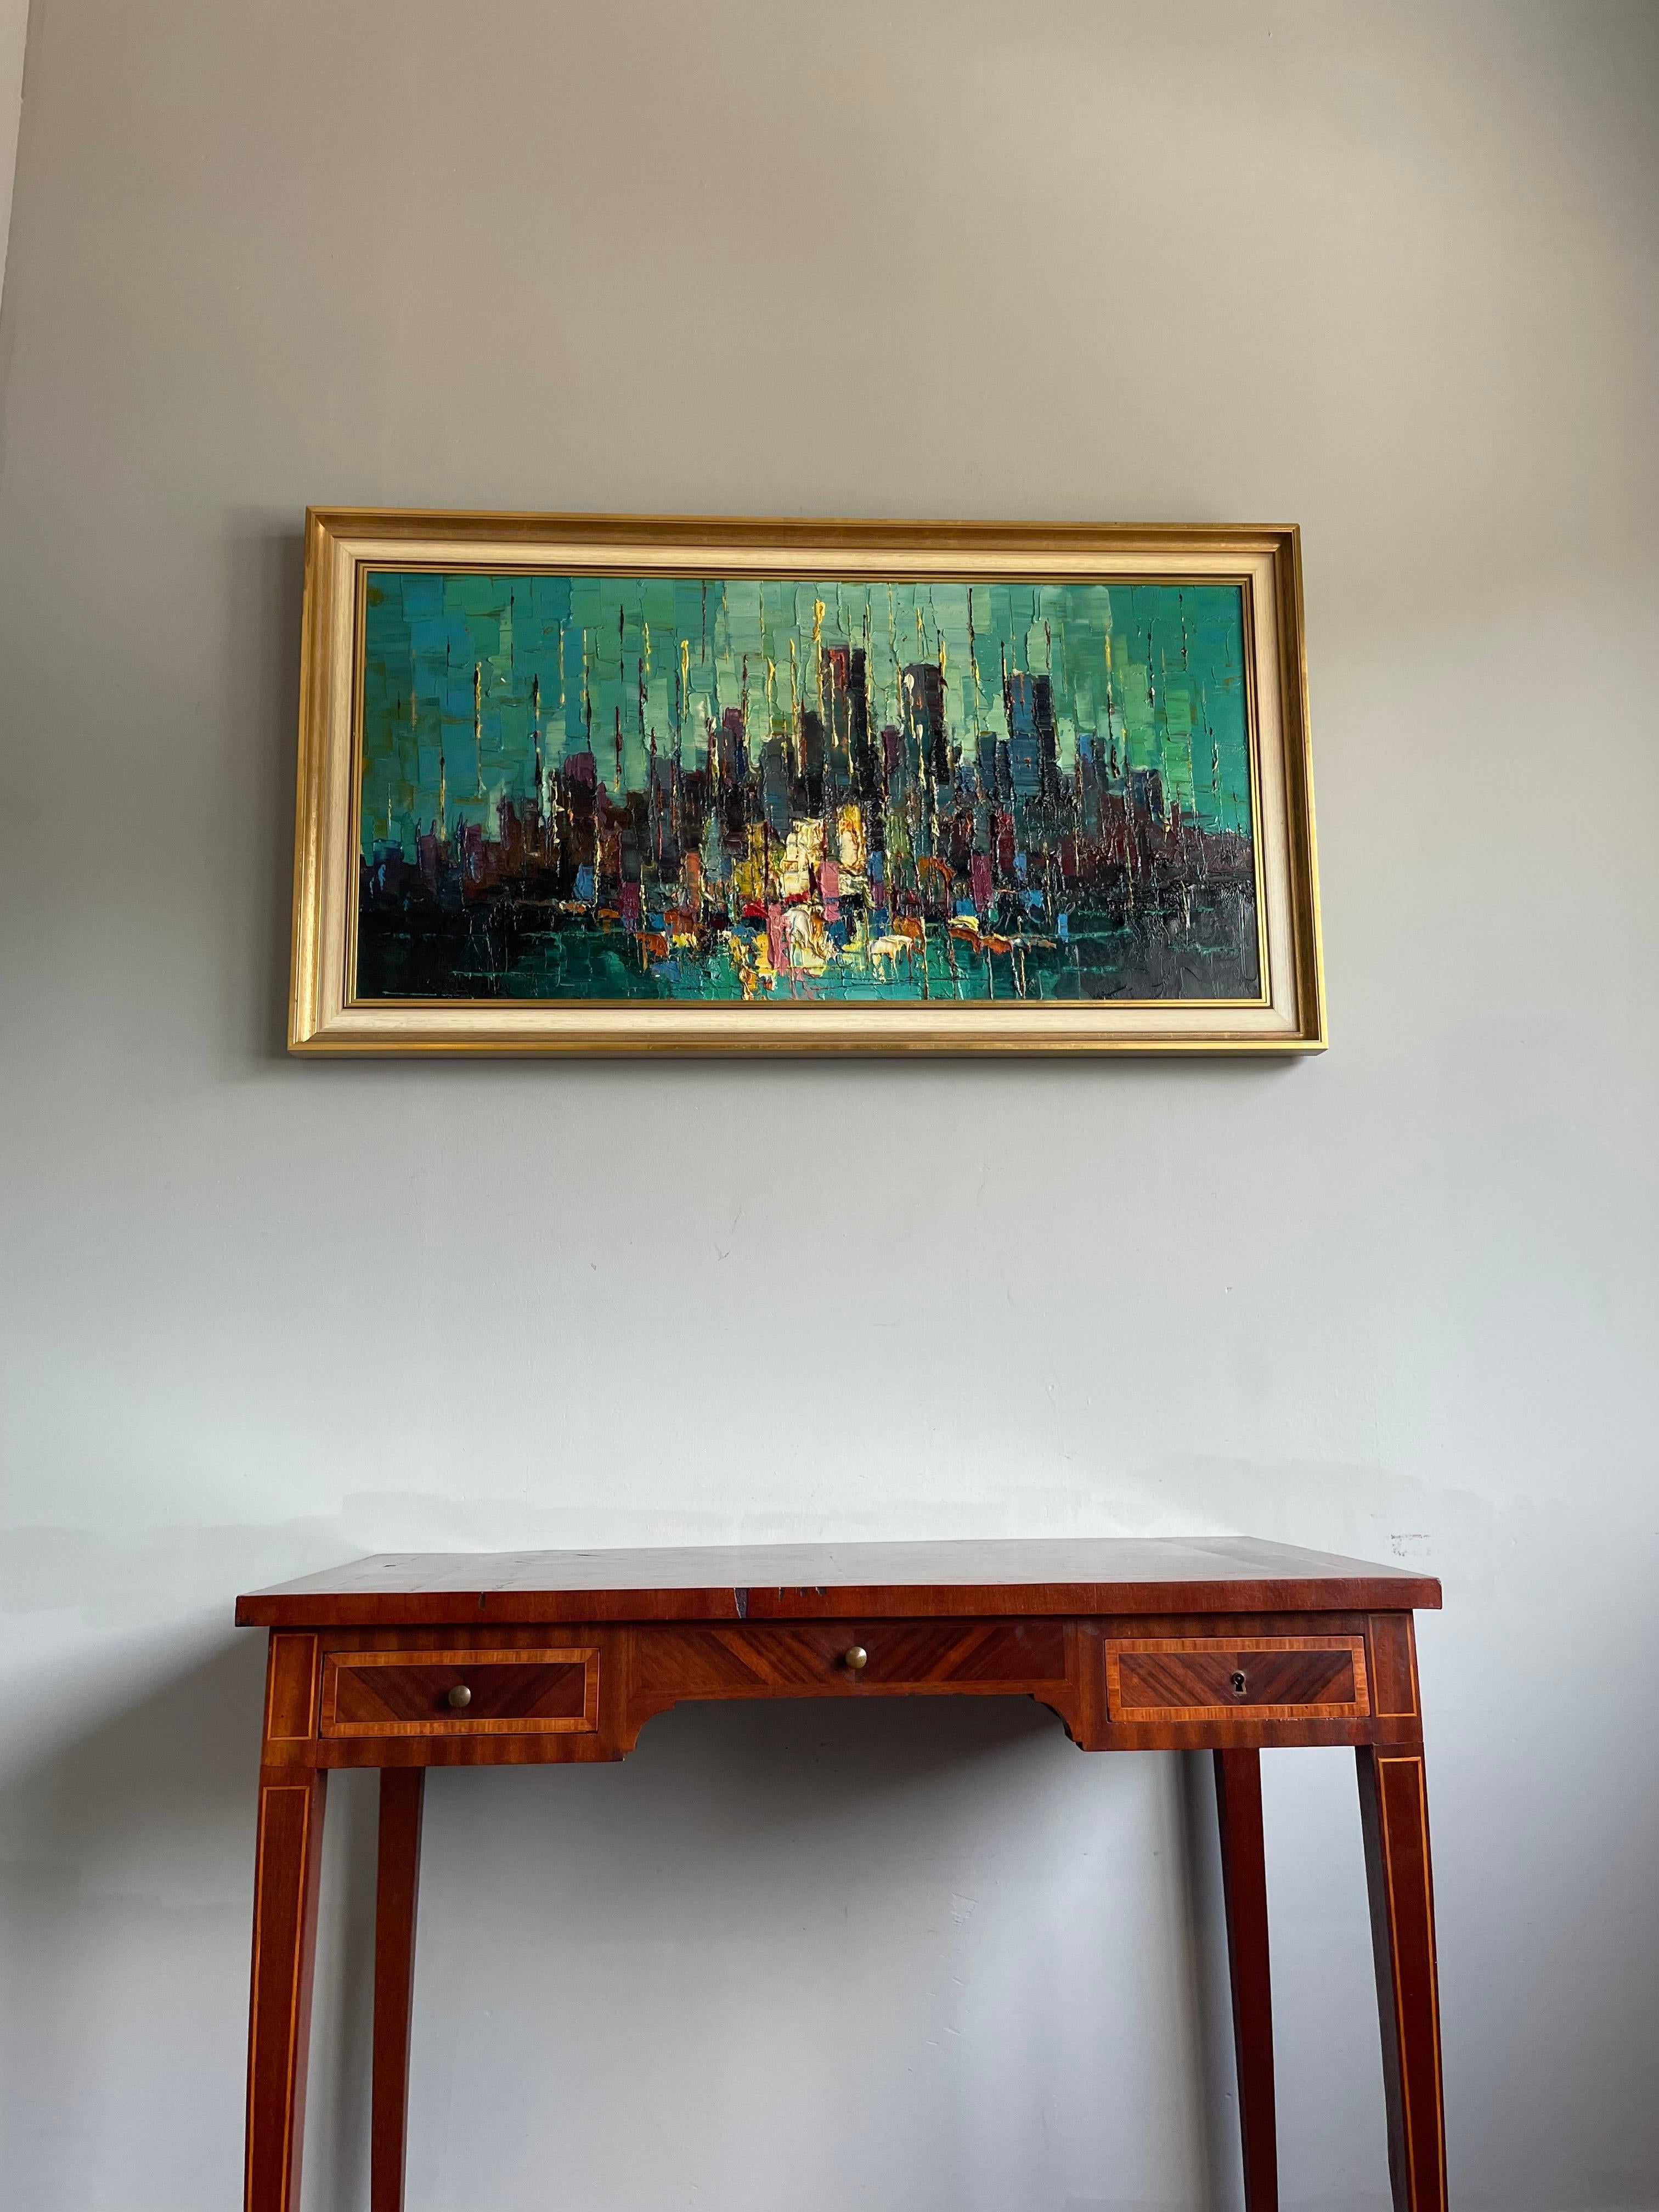 Hand-Crafted Midcentury Modern Hand Painted Abstract Oil on Canvas Painting American Skyline For Sale